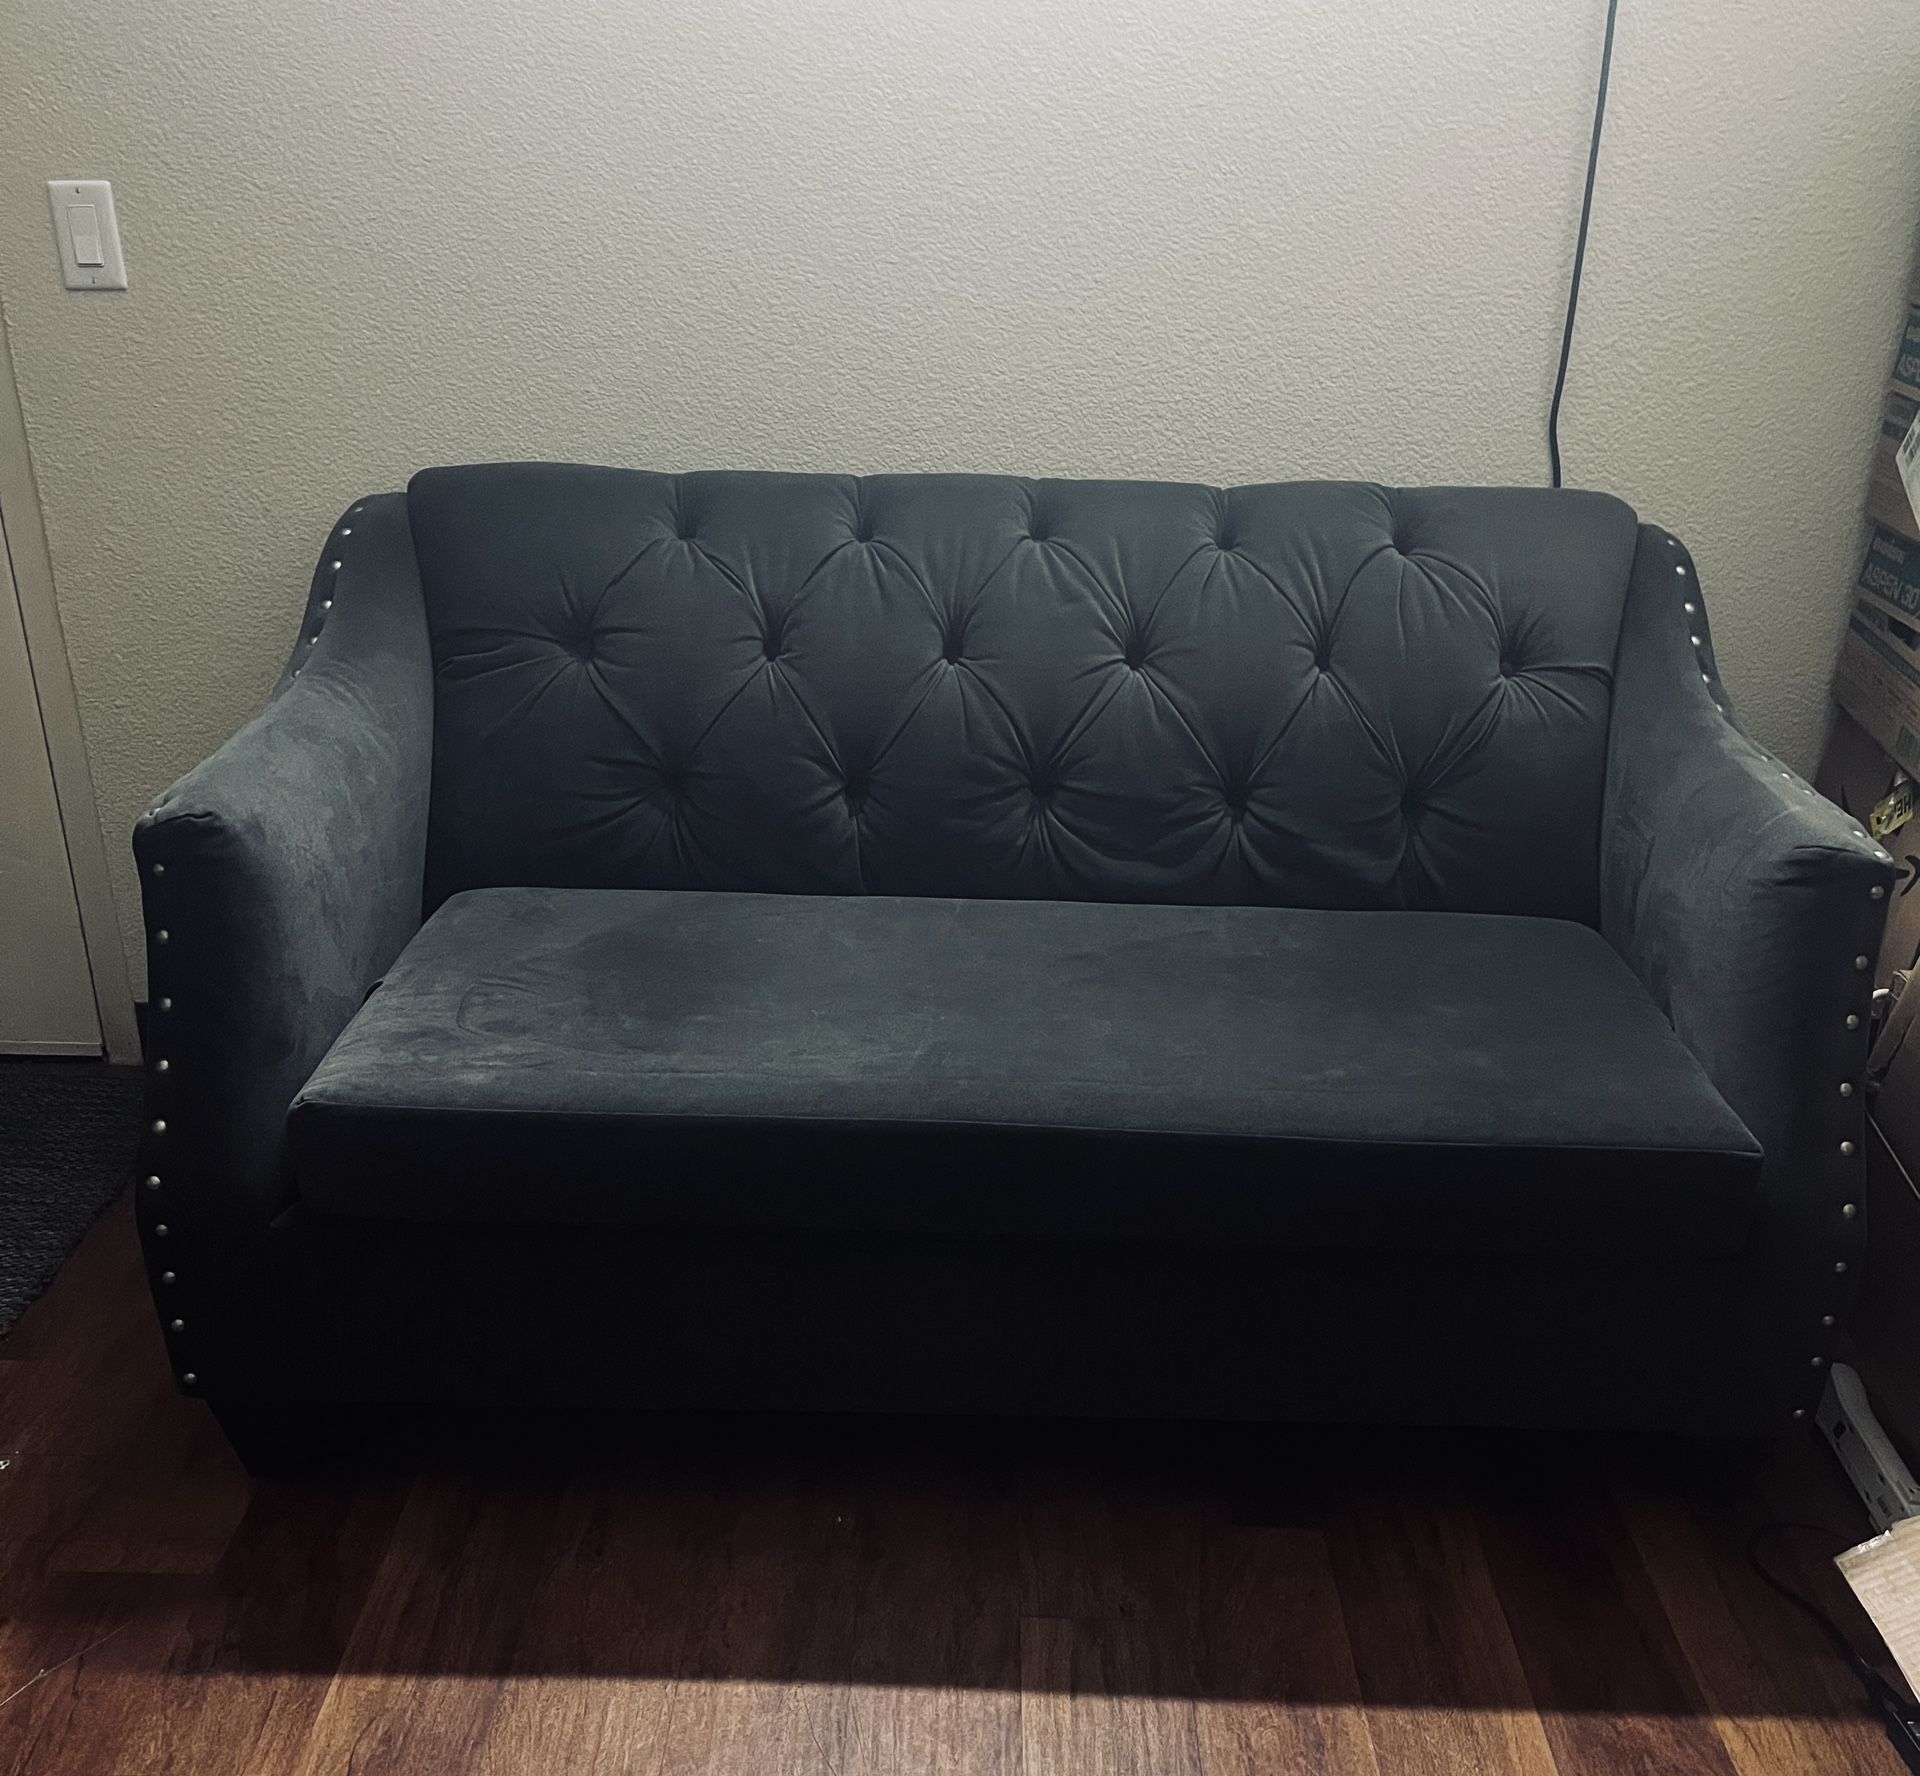 New Charcoal Sofa & Loveseat, Set Was Purchased For $2200